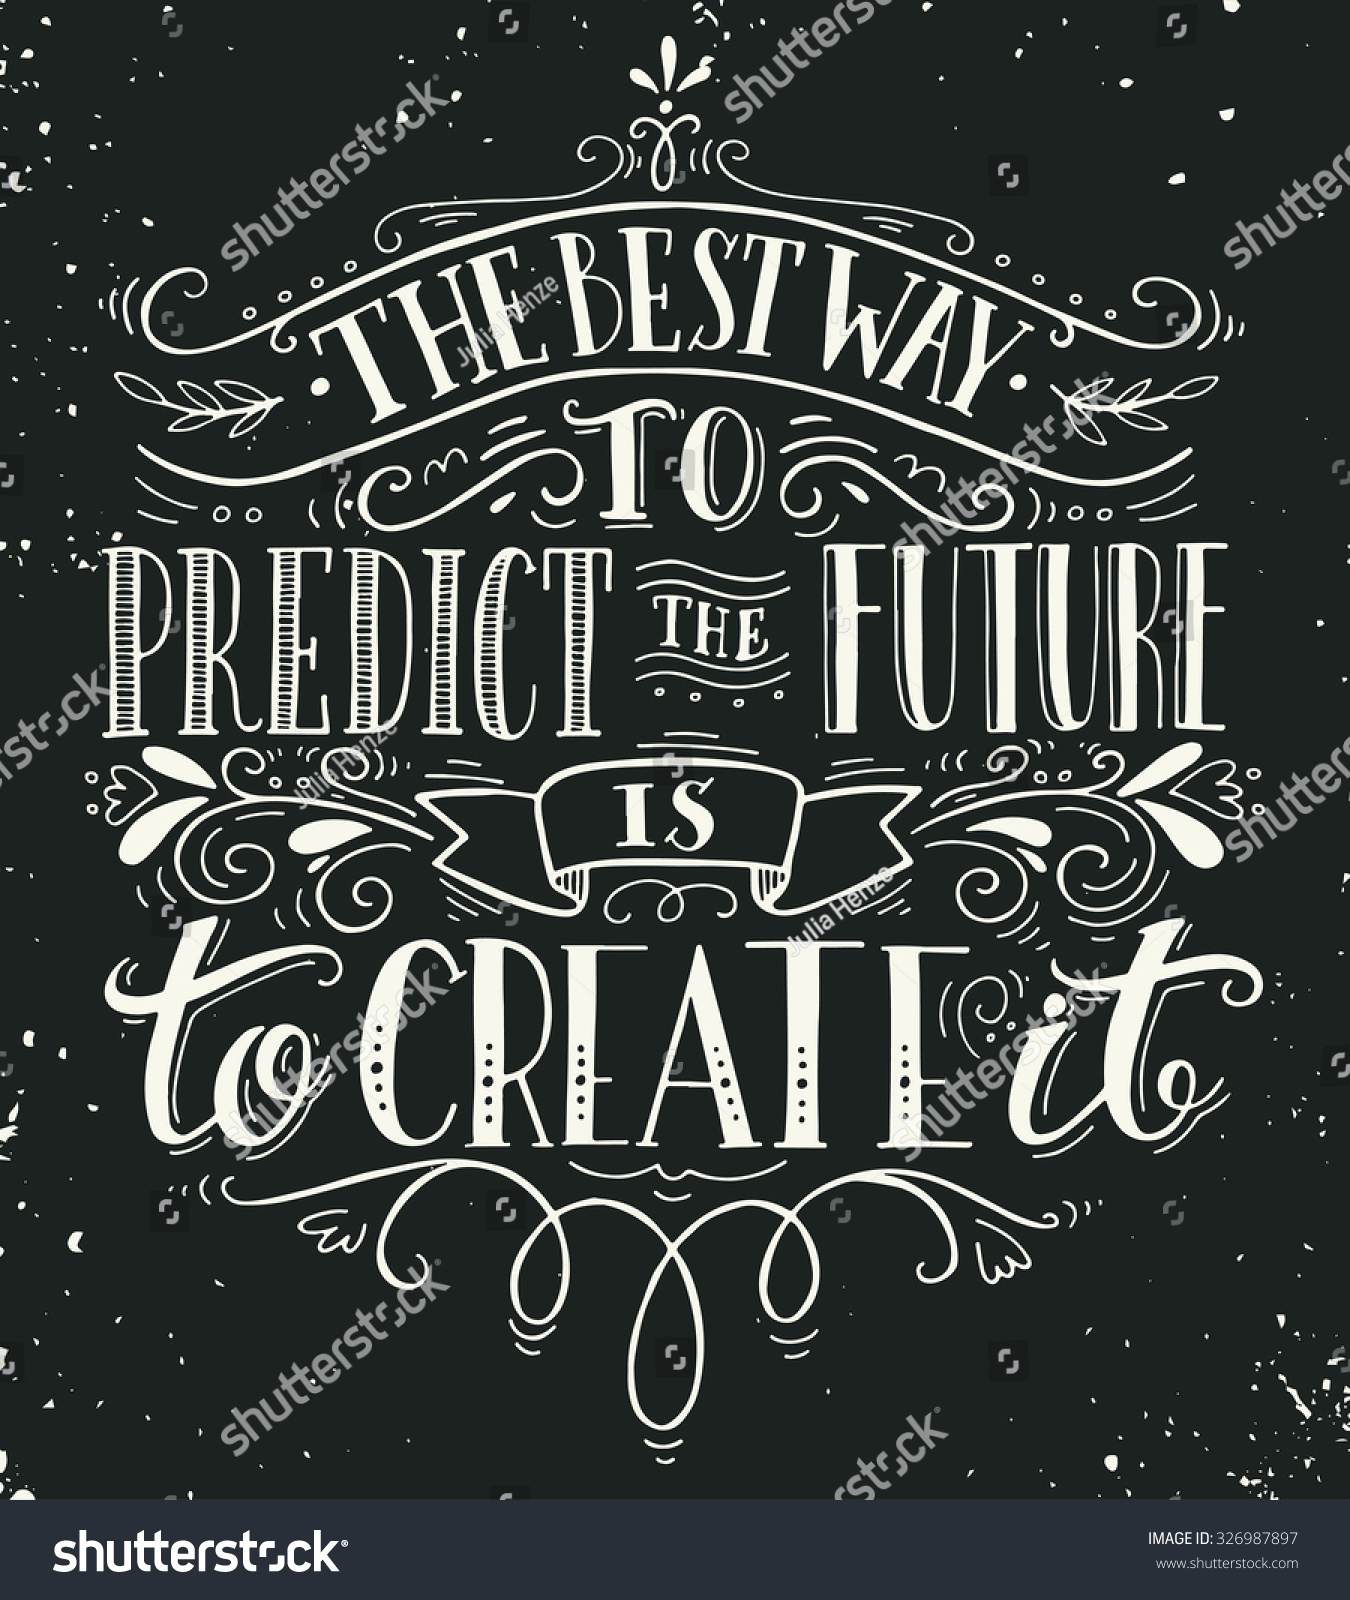 Image result for the best way to predict the future is to create it quotes and pictures